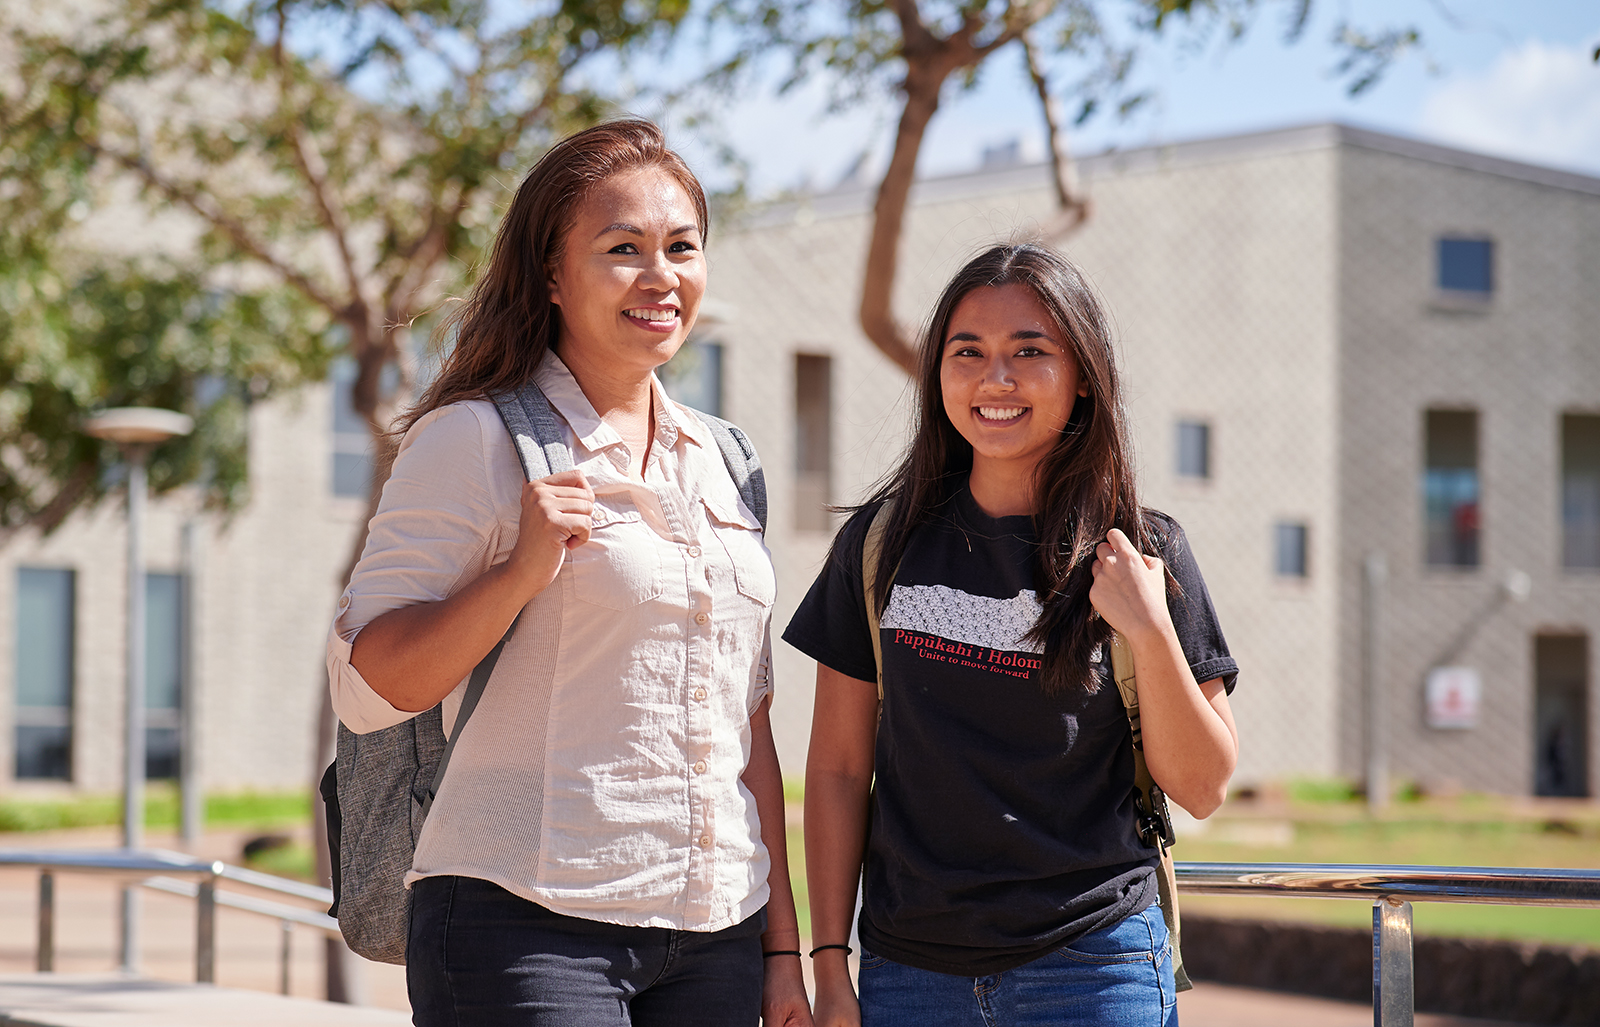 Two students standing and smiling in the campus mall area.